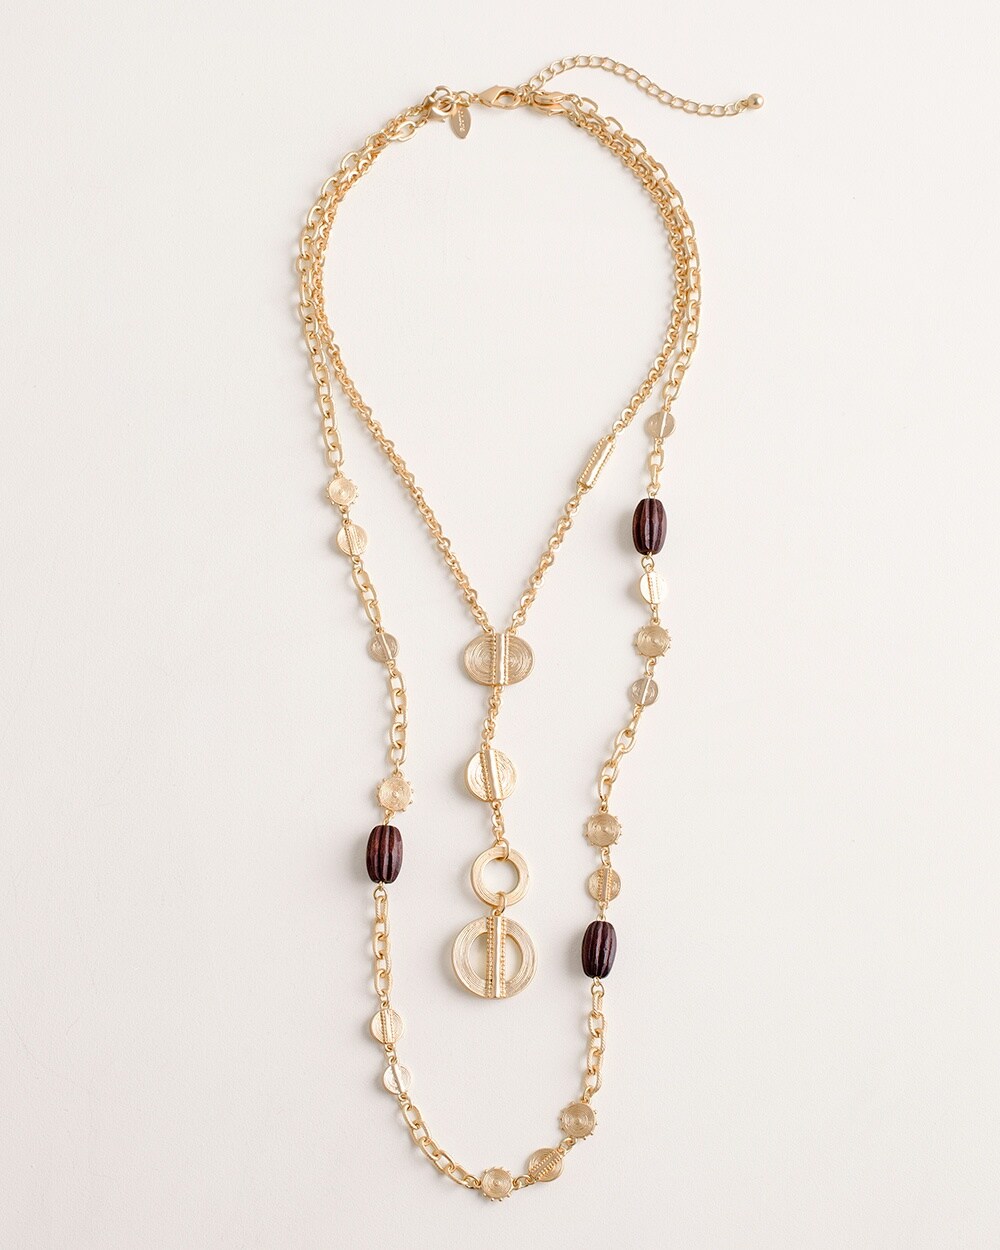 Textured Gold-Tone Convertible Multi-Strand Necklace